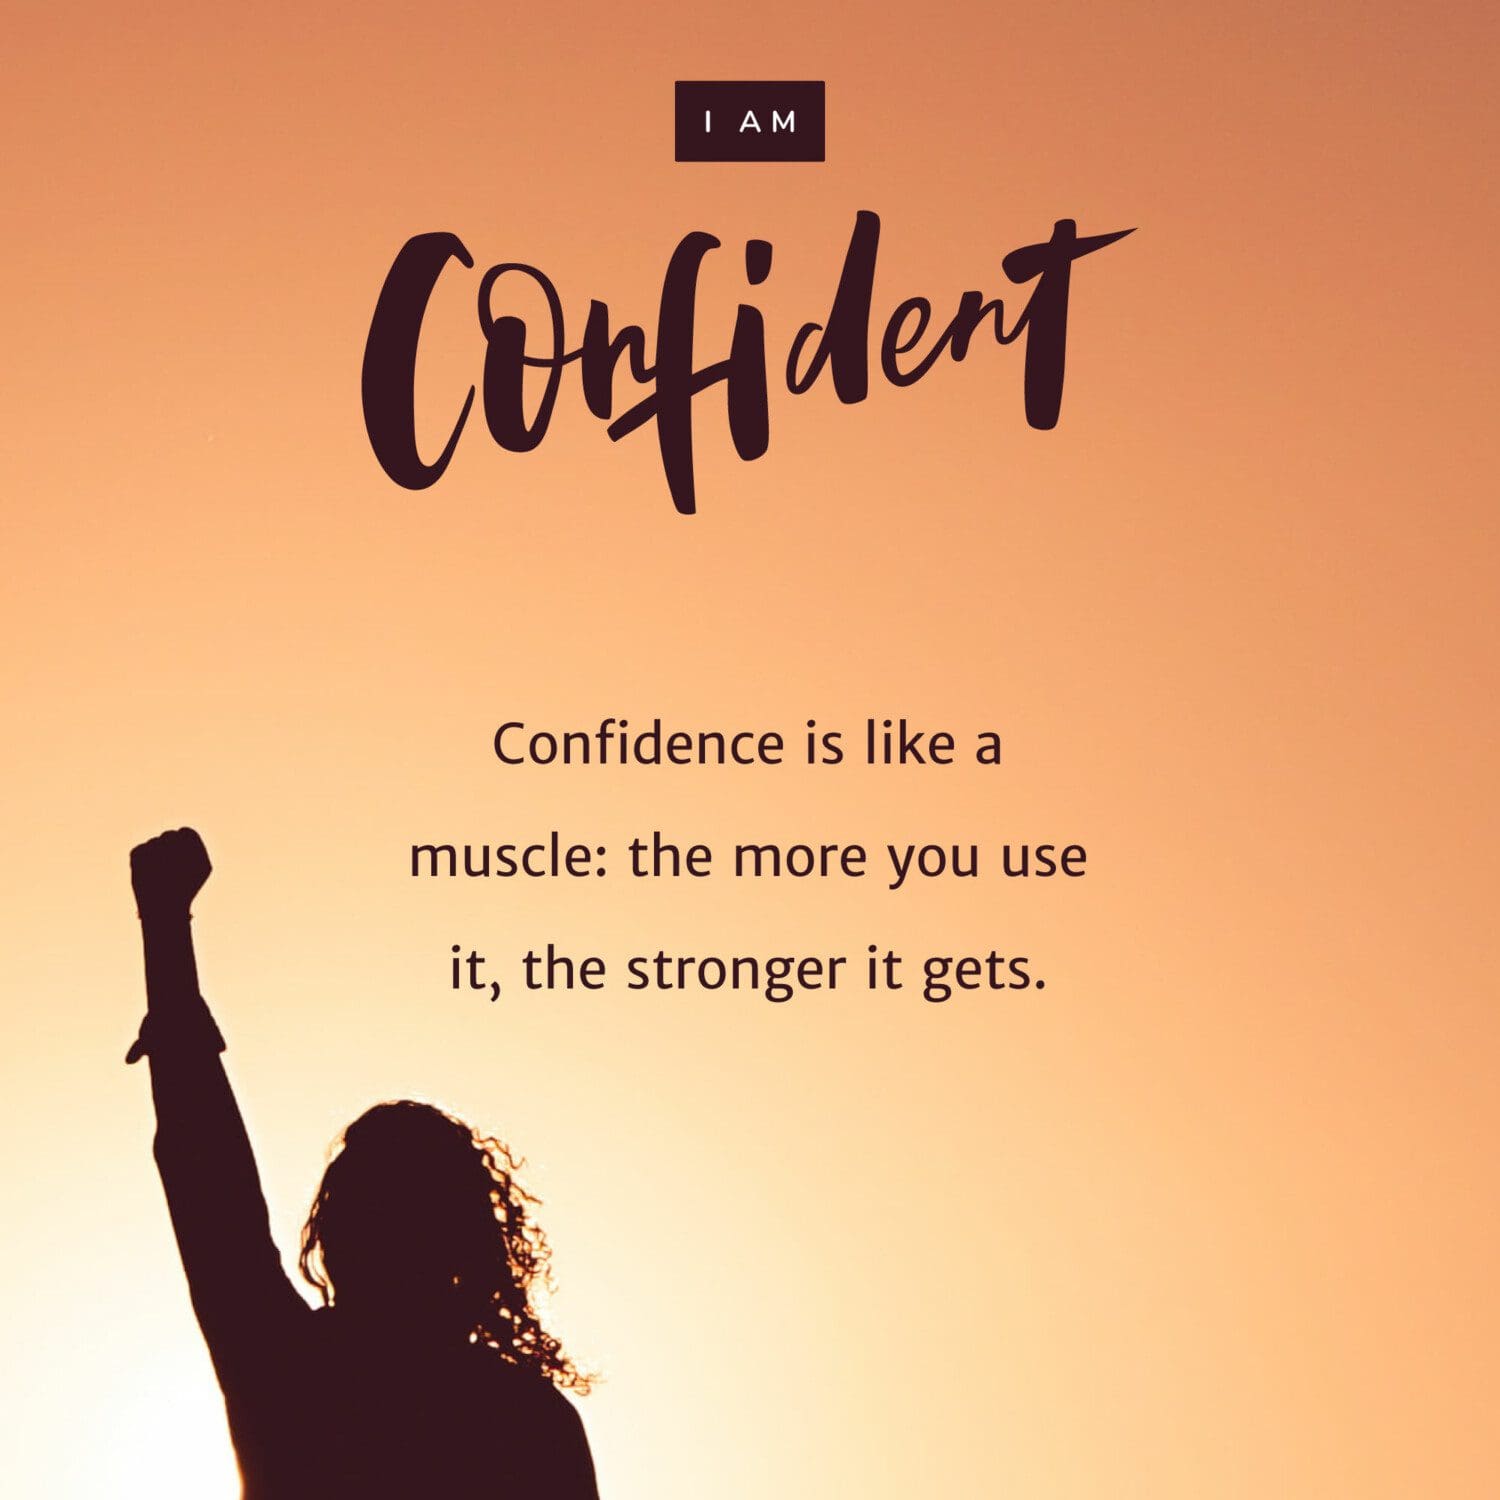 Confidence is like a muscle: the more you use it, the stronger it gets.